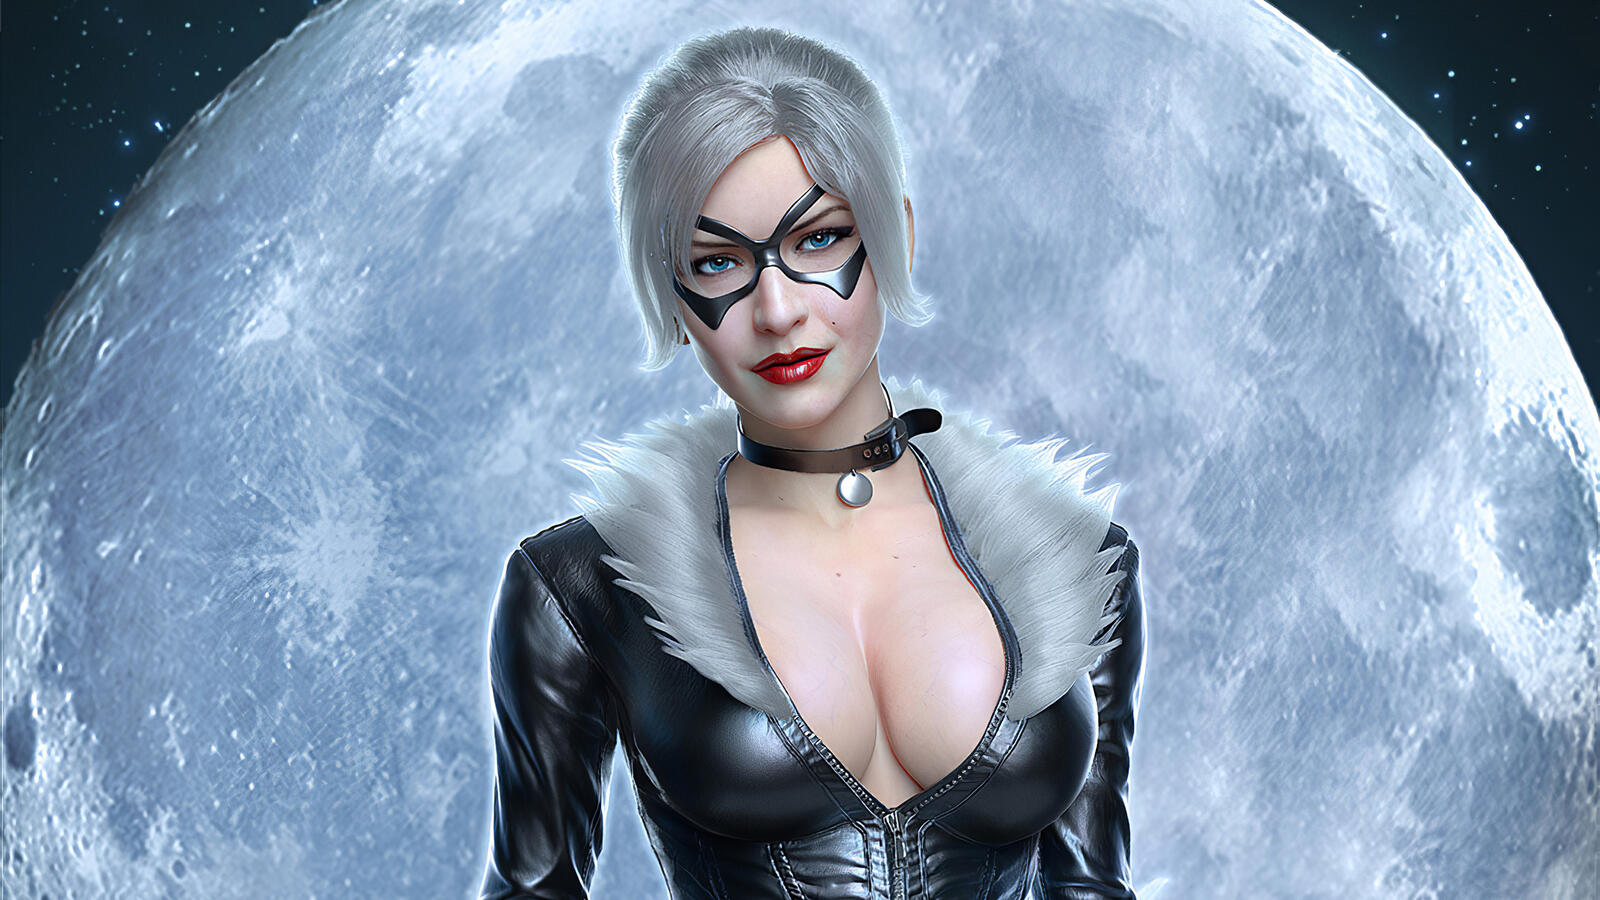 Wallpapers catwoman superheroes white hair on the desktop